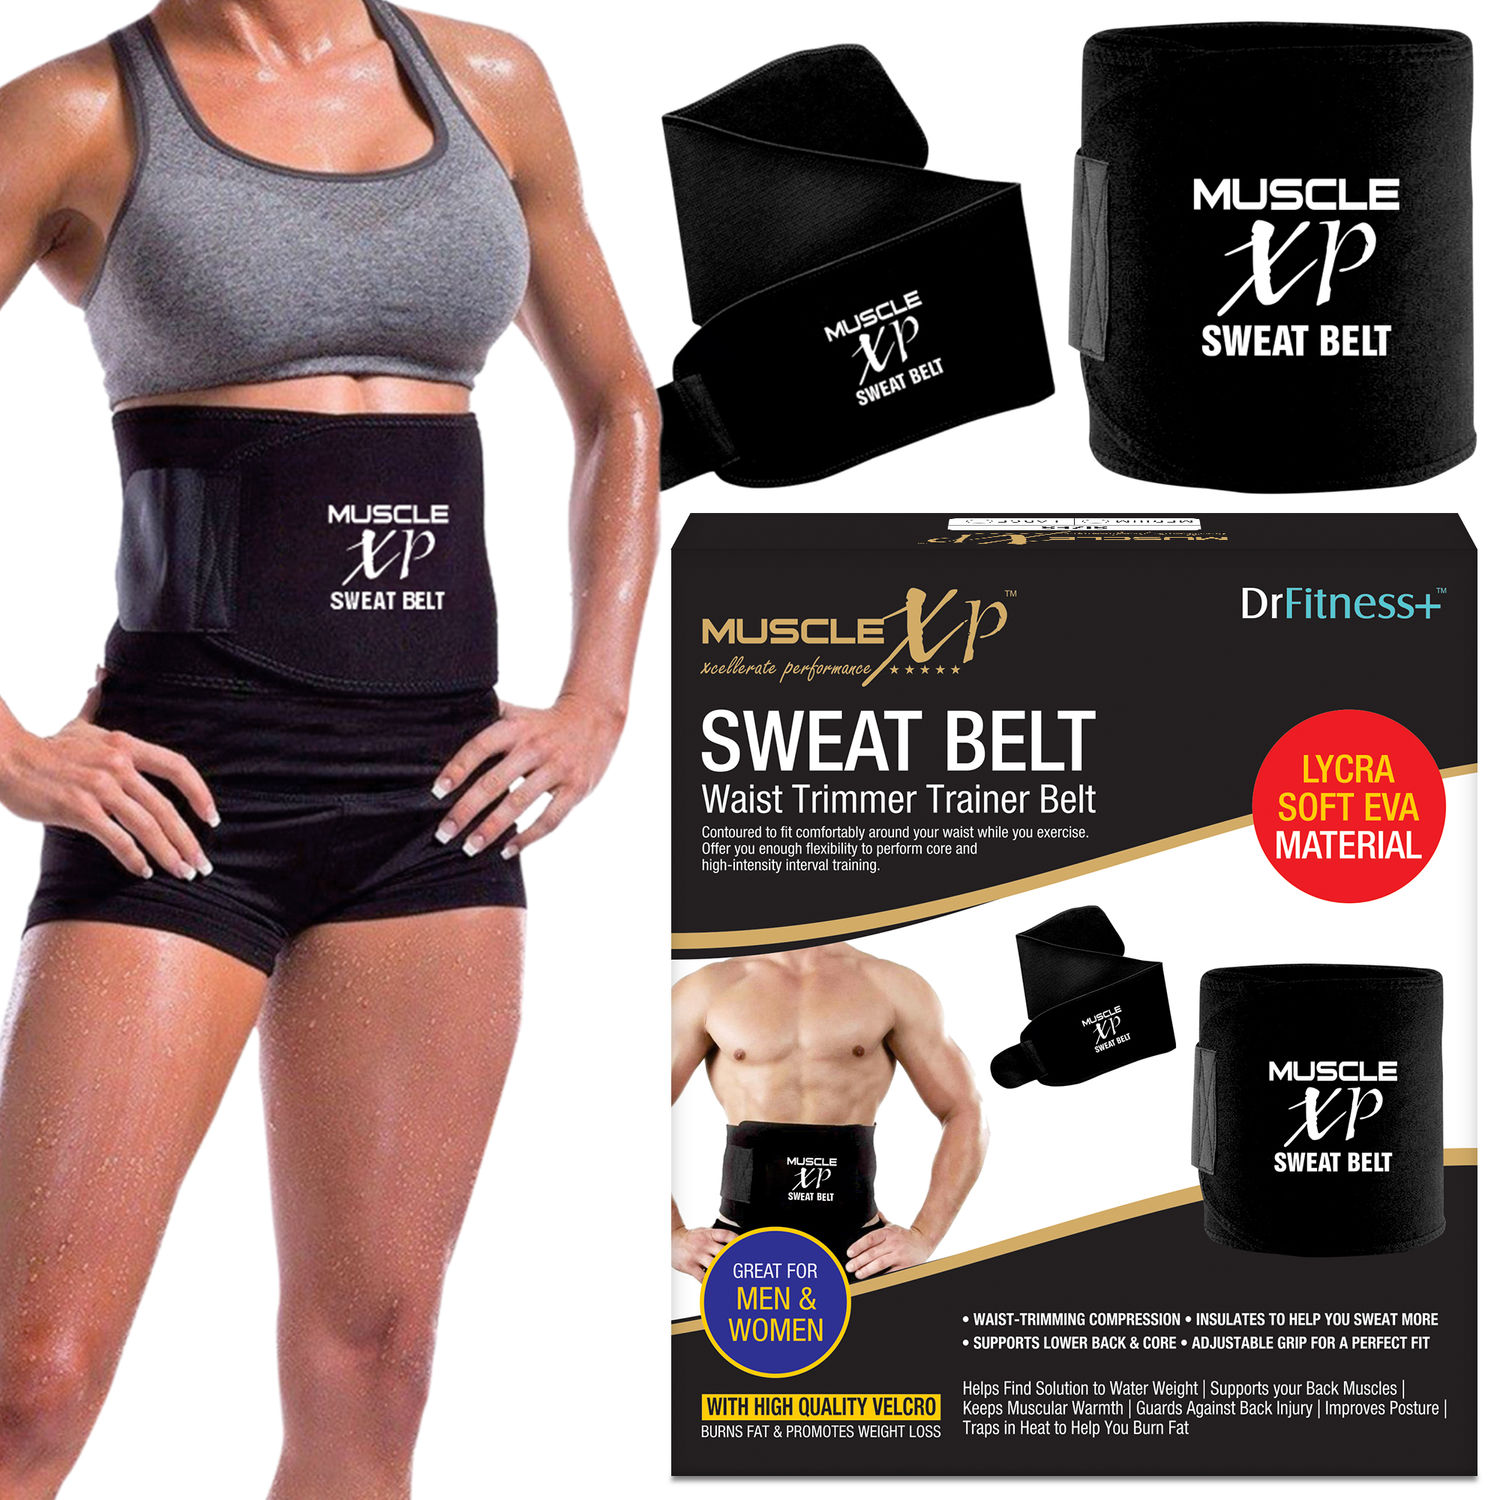 https://media6.ppl-media.com//tr:h-750,w-750,c-at_max,dpr-2/static/img/product/287628/musclexp-drfitness-sweat-belt-for-men-and-women-fat-burning-healthy-sweat-weight-loss-non-tearable-tummy-trimming-46-black_1_display_1677043529_d0b6d4ef.jpg